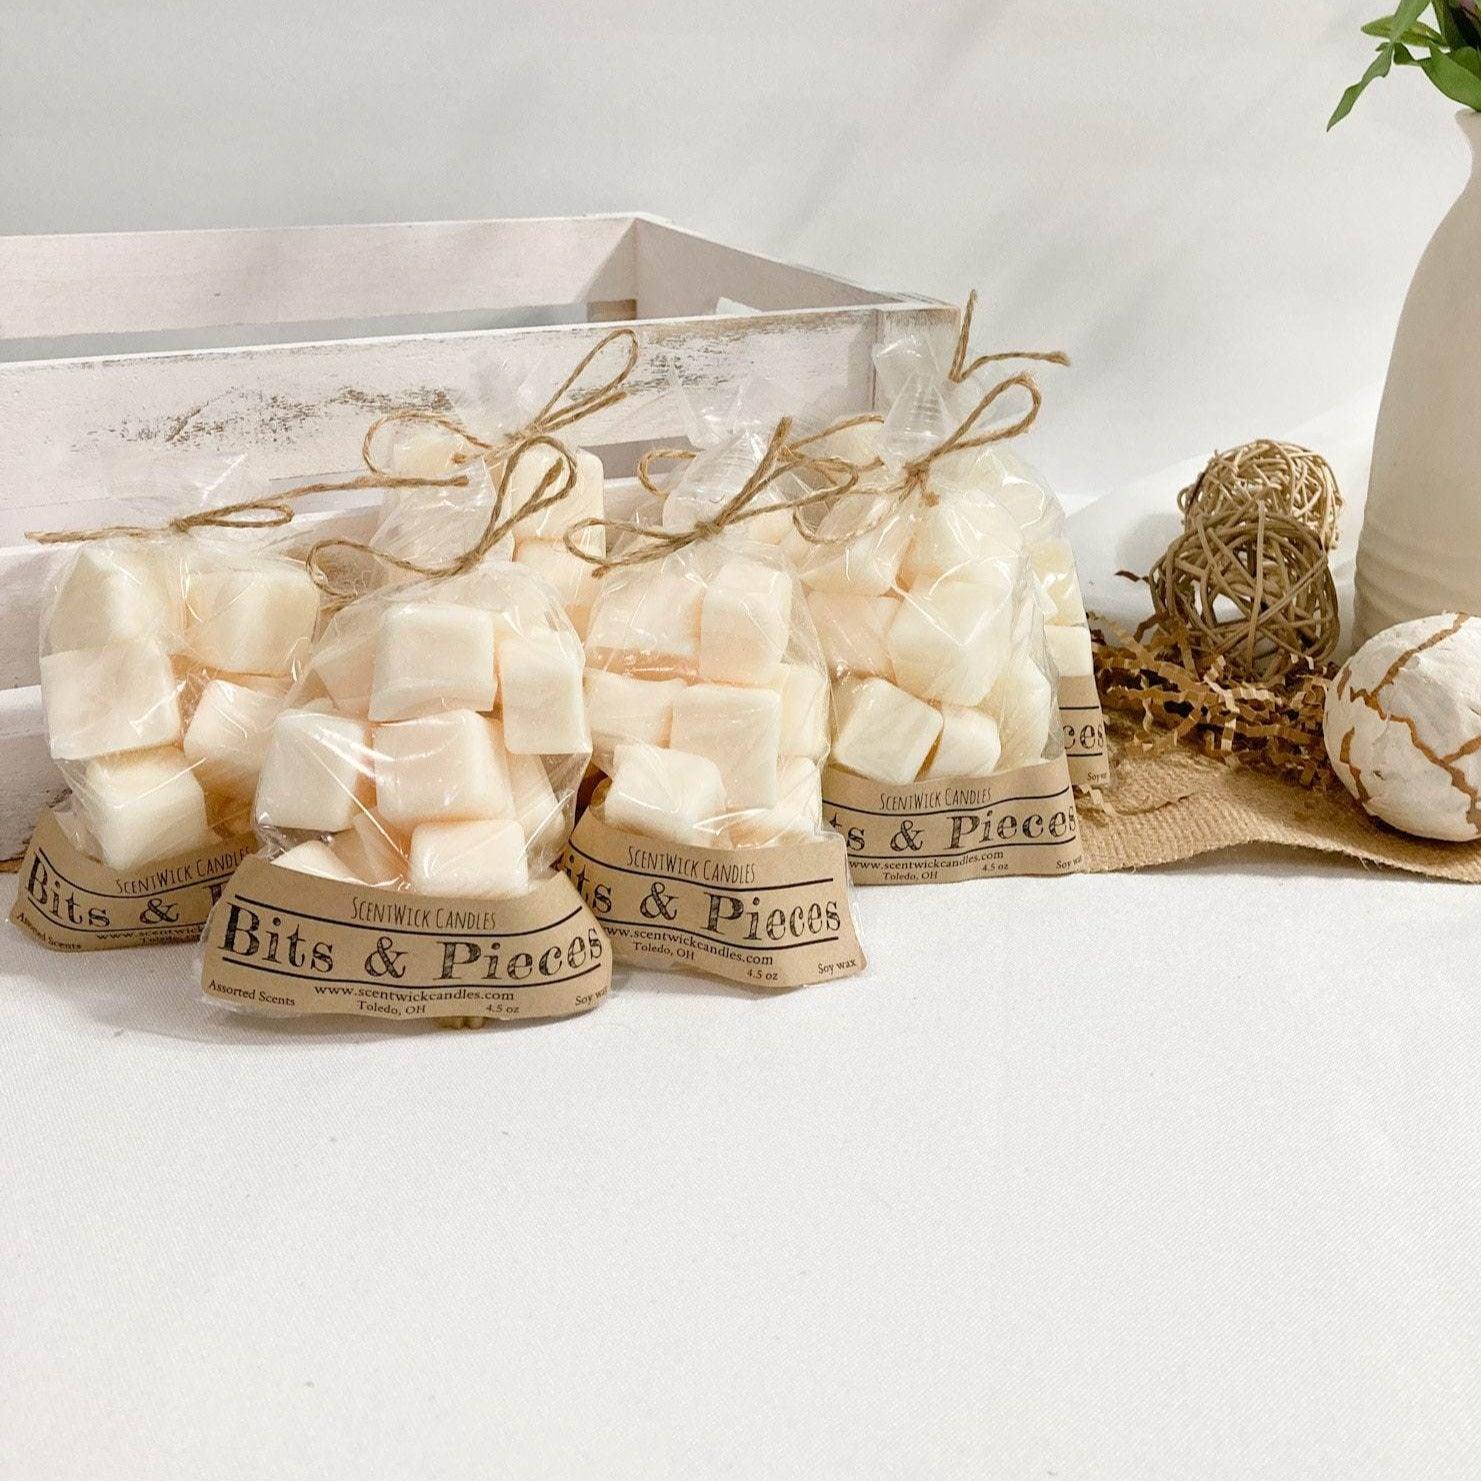 Bits and Pieces Assorted Scent Wax Melt - ScentWick Candles